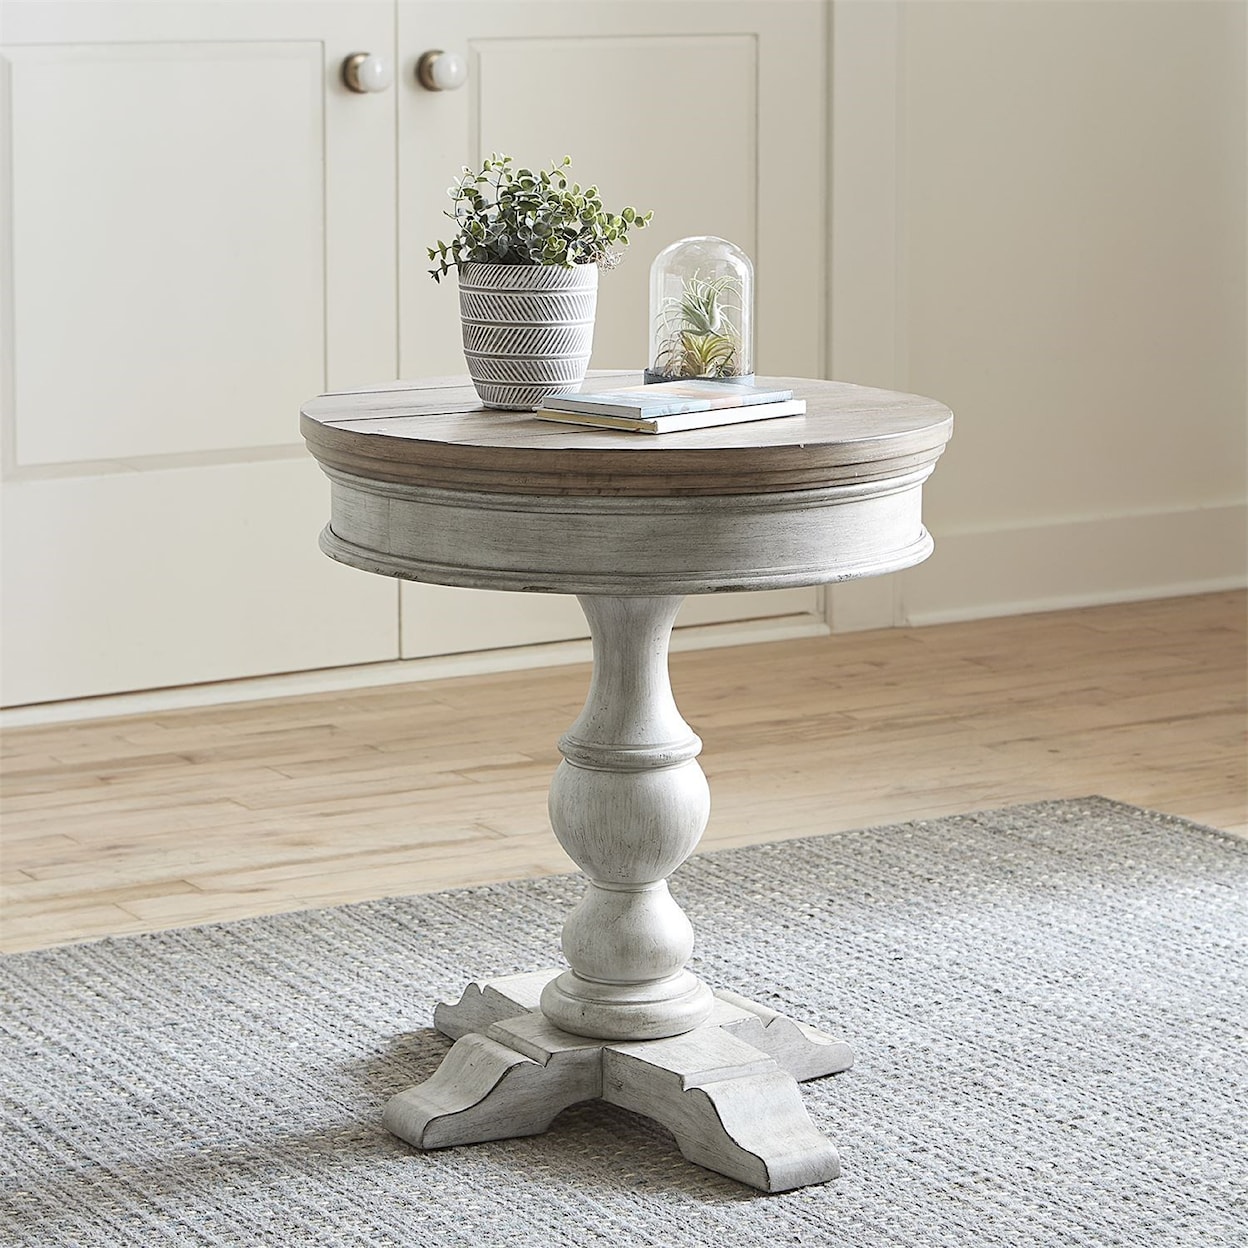 Liberty Furniture Heartland Round Pedestal Chairside Table